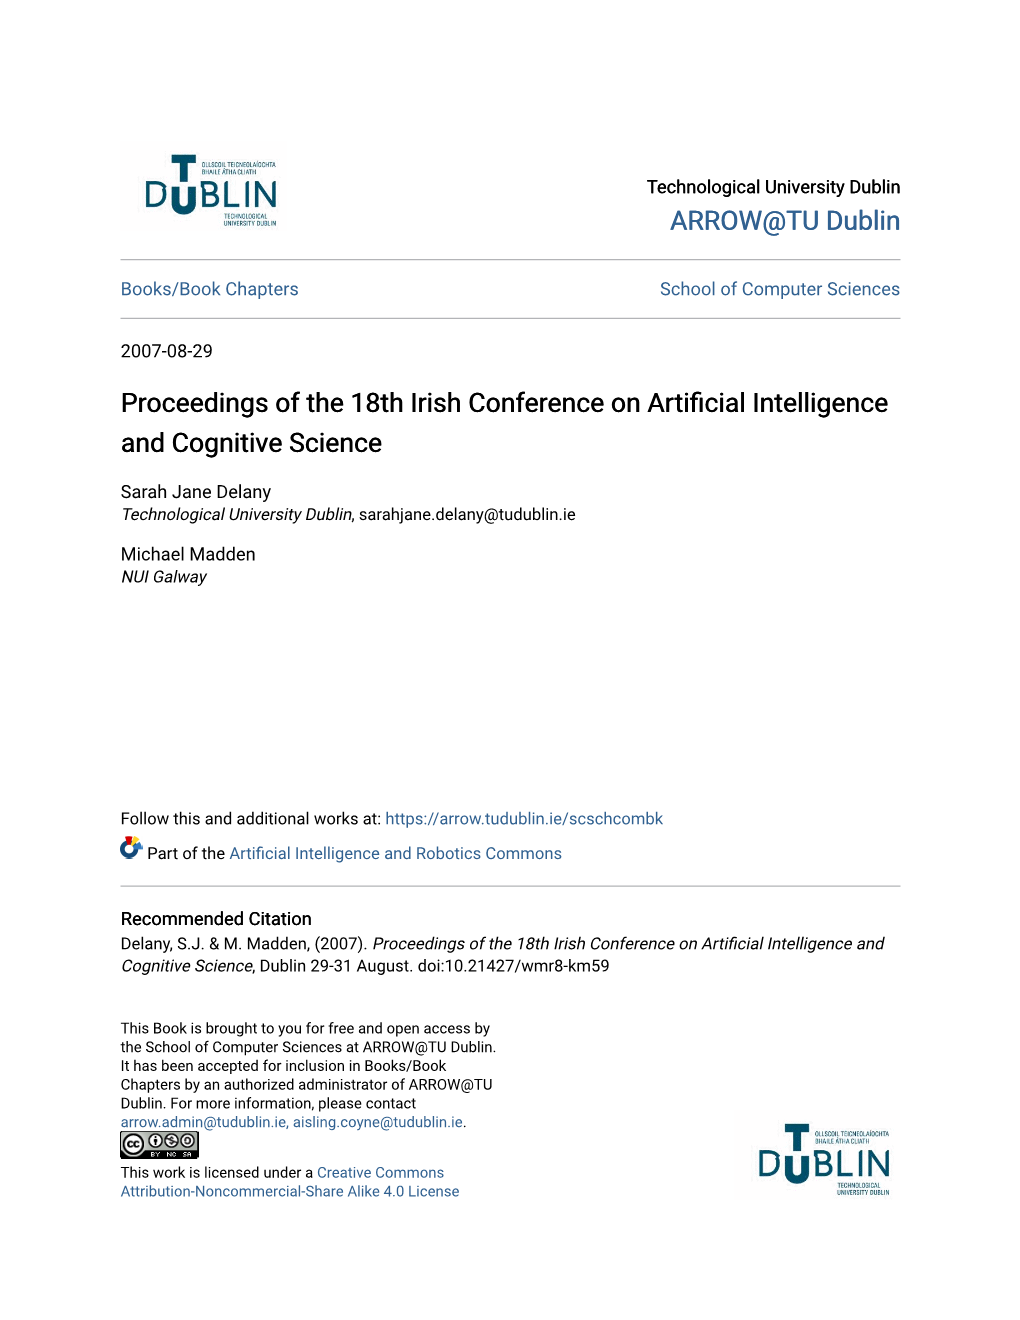 Proceedings of the 18Th Irish Conference on Artificial Intelligence and Cognitive Science